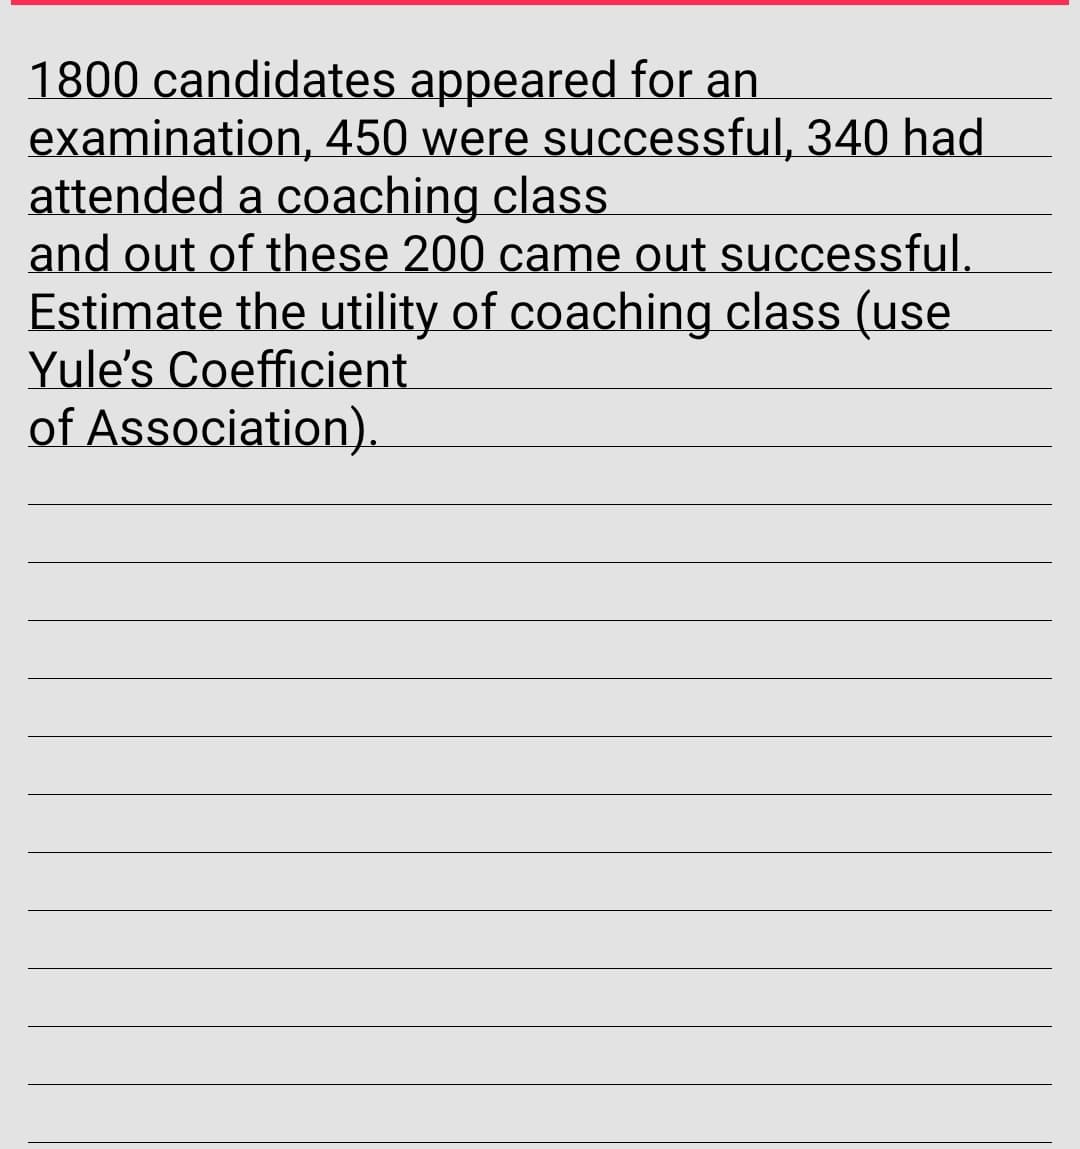 1800 candidates appeared for an
examination, 450 were successful, 340 had
attended a coaching class
and out of these 200 came out successful.
Estimate the utility of coaching class (use
Yule's Coefficient
of Association).
